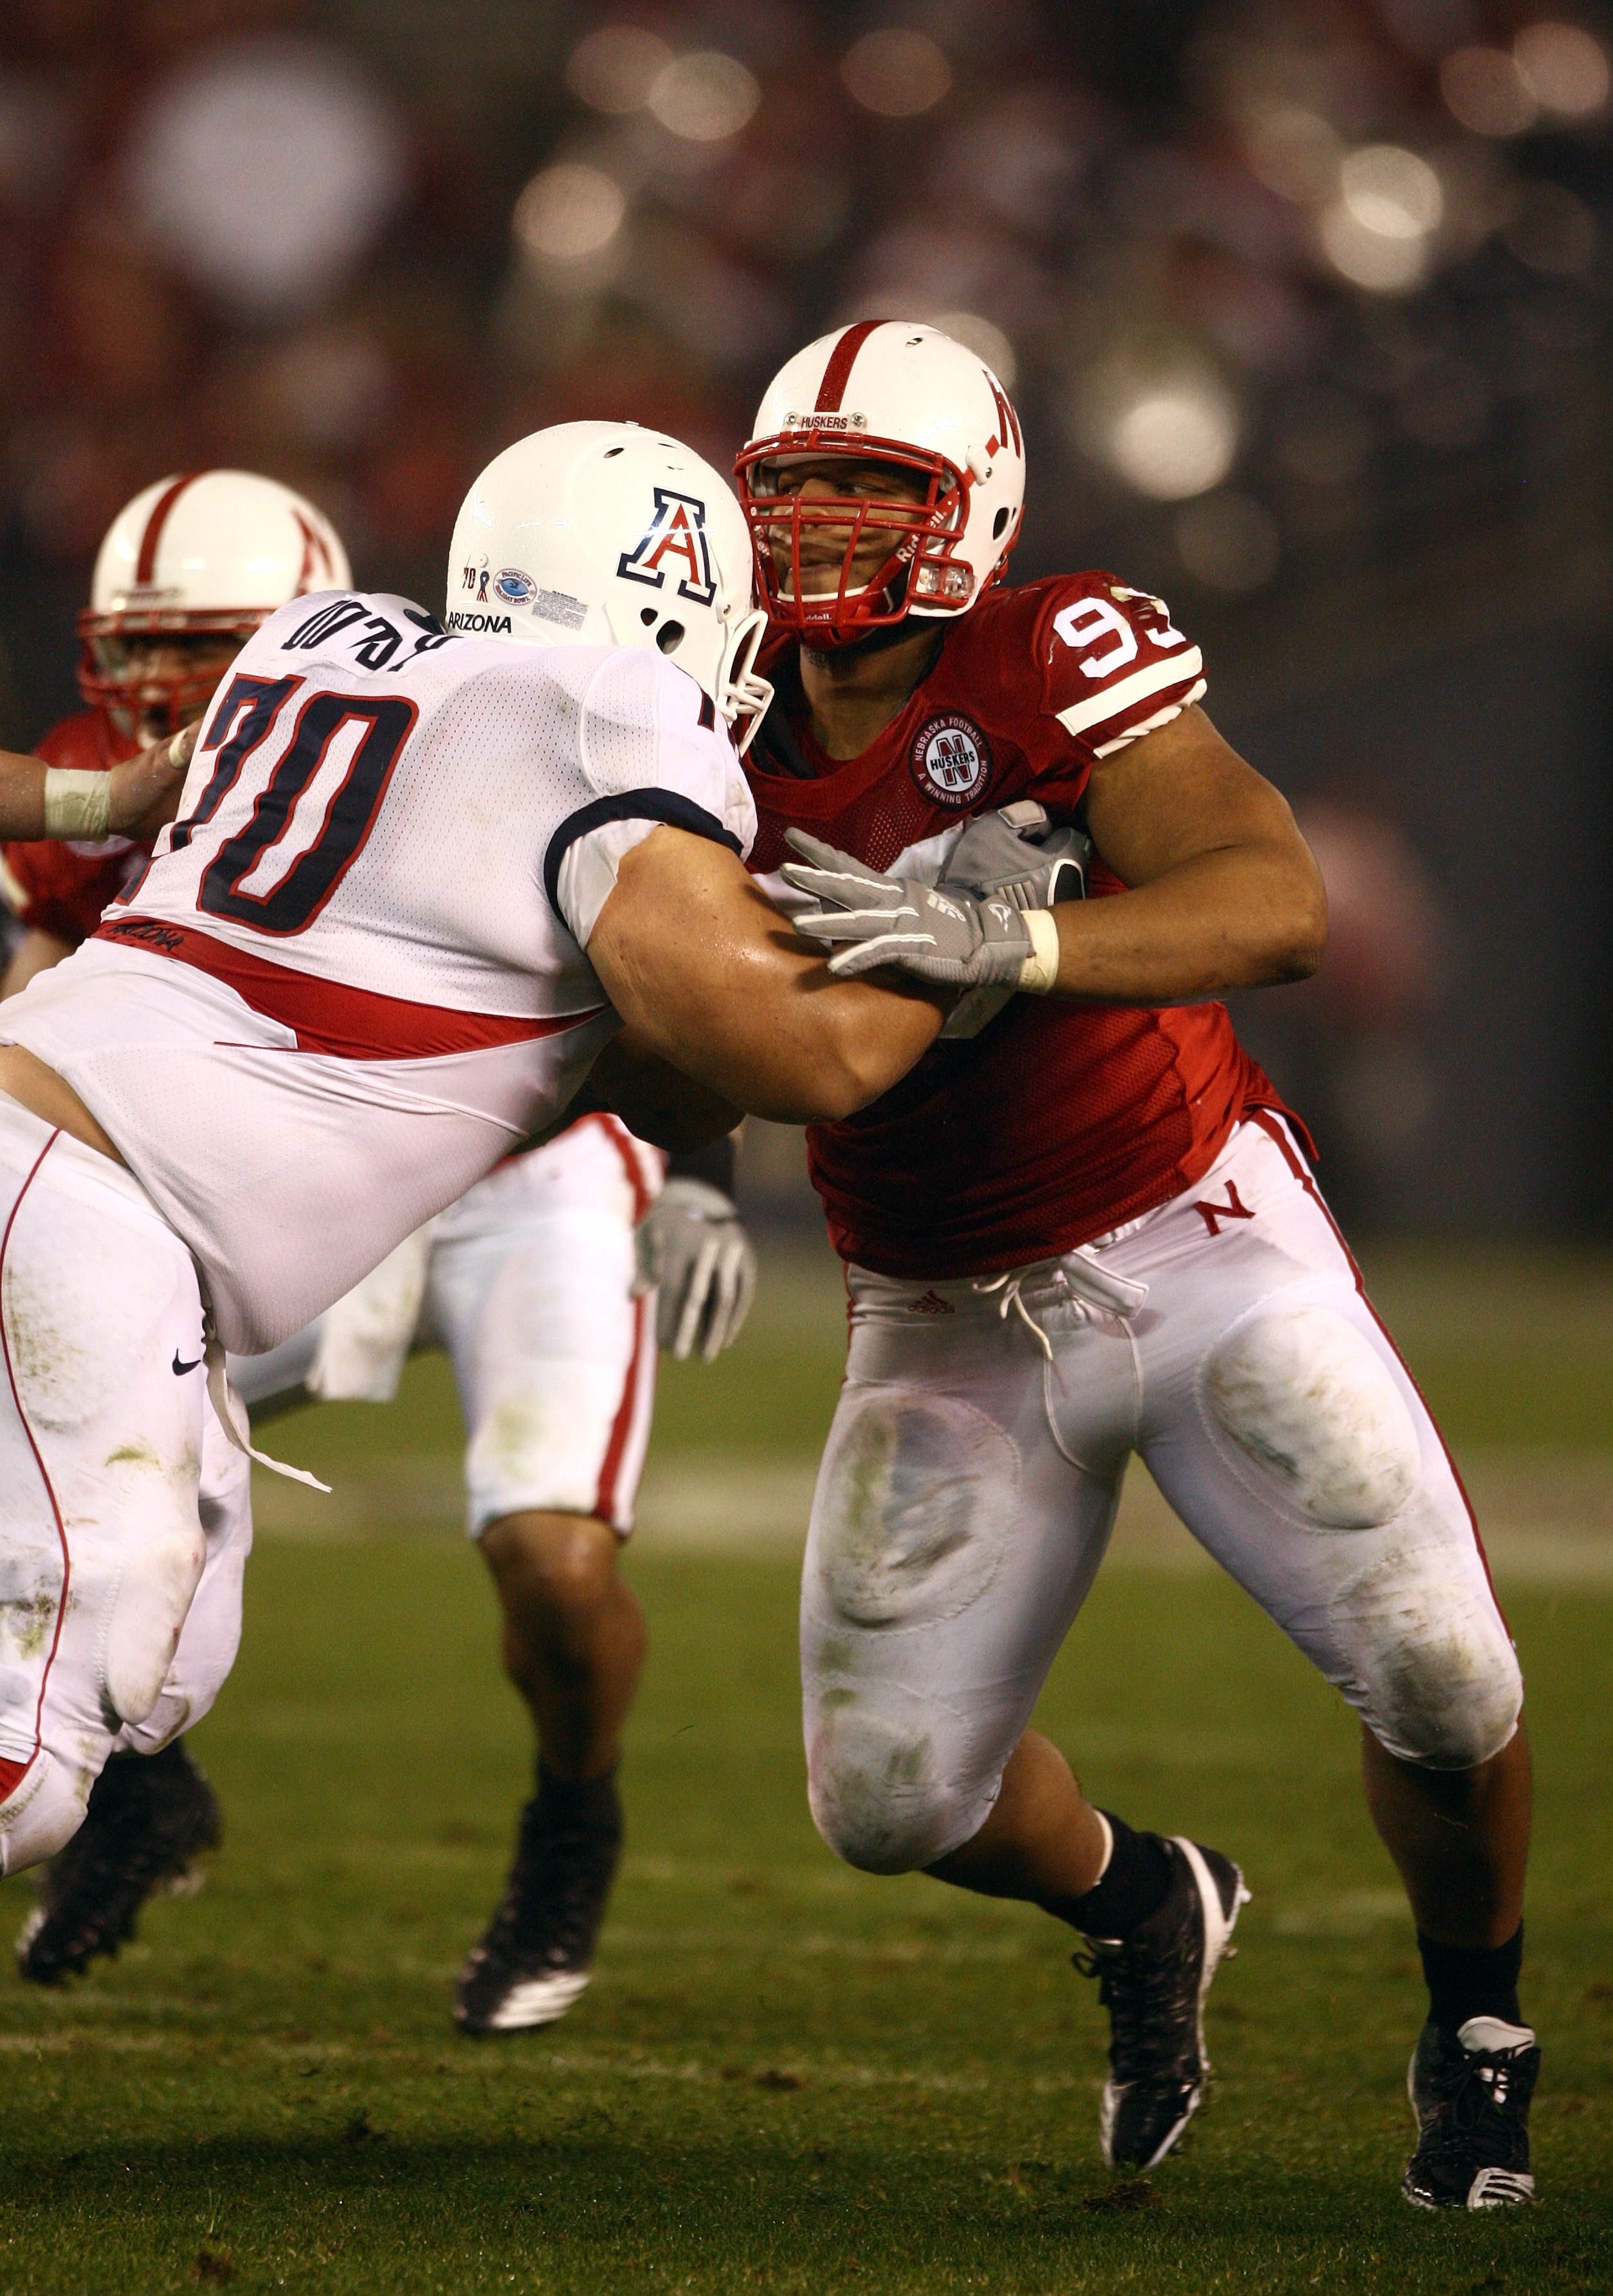 SAN DIEGO - DECEMBER 30:  Ndamukong Suh #93 of the University of Nebraska Cornhuskers engages an offensive lineman in a block during the Pacific Life Holiday Bowl against University of Arizona Wildcats on December 30, 2009 at Qualcomm Stadium in San Diego